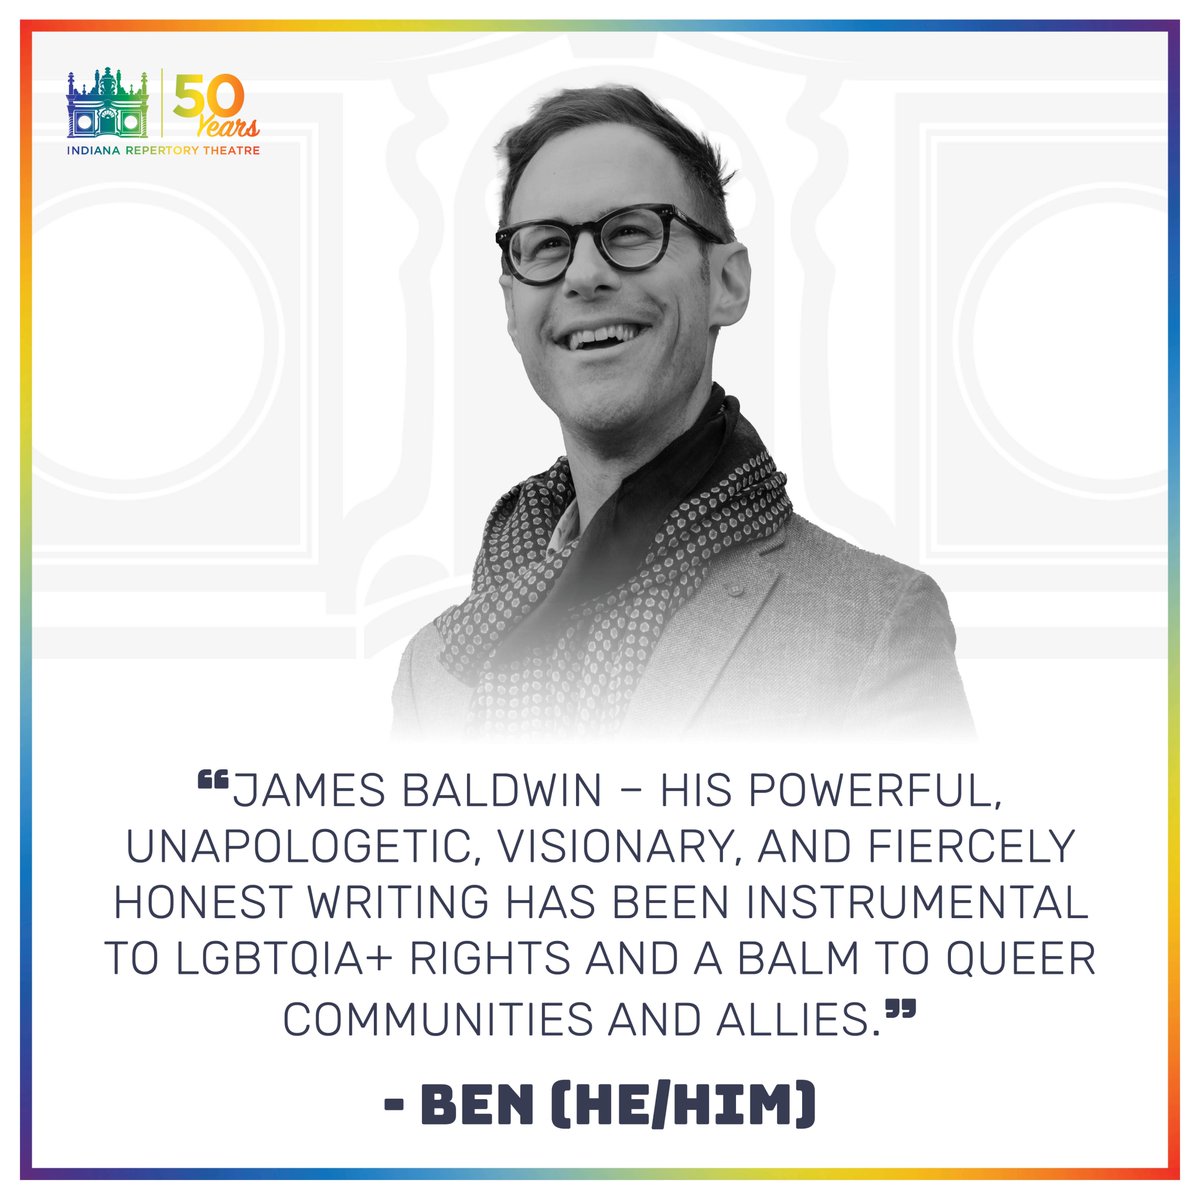 Who would you spotlight as a queer icon? IRT's next Margot Lacy Eccles Artistic Director Benjamin Hanna shares: 'James Baldwin–his powerful, unapologetic, visionary, and fiercely honest writing has been instrumental to LGBTQIA+ rights and a balm to queer communities and allies.'